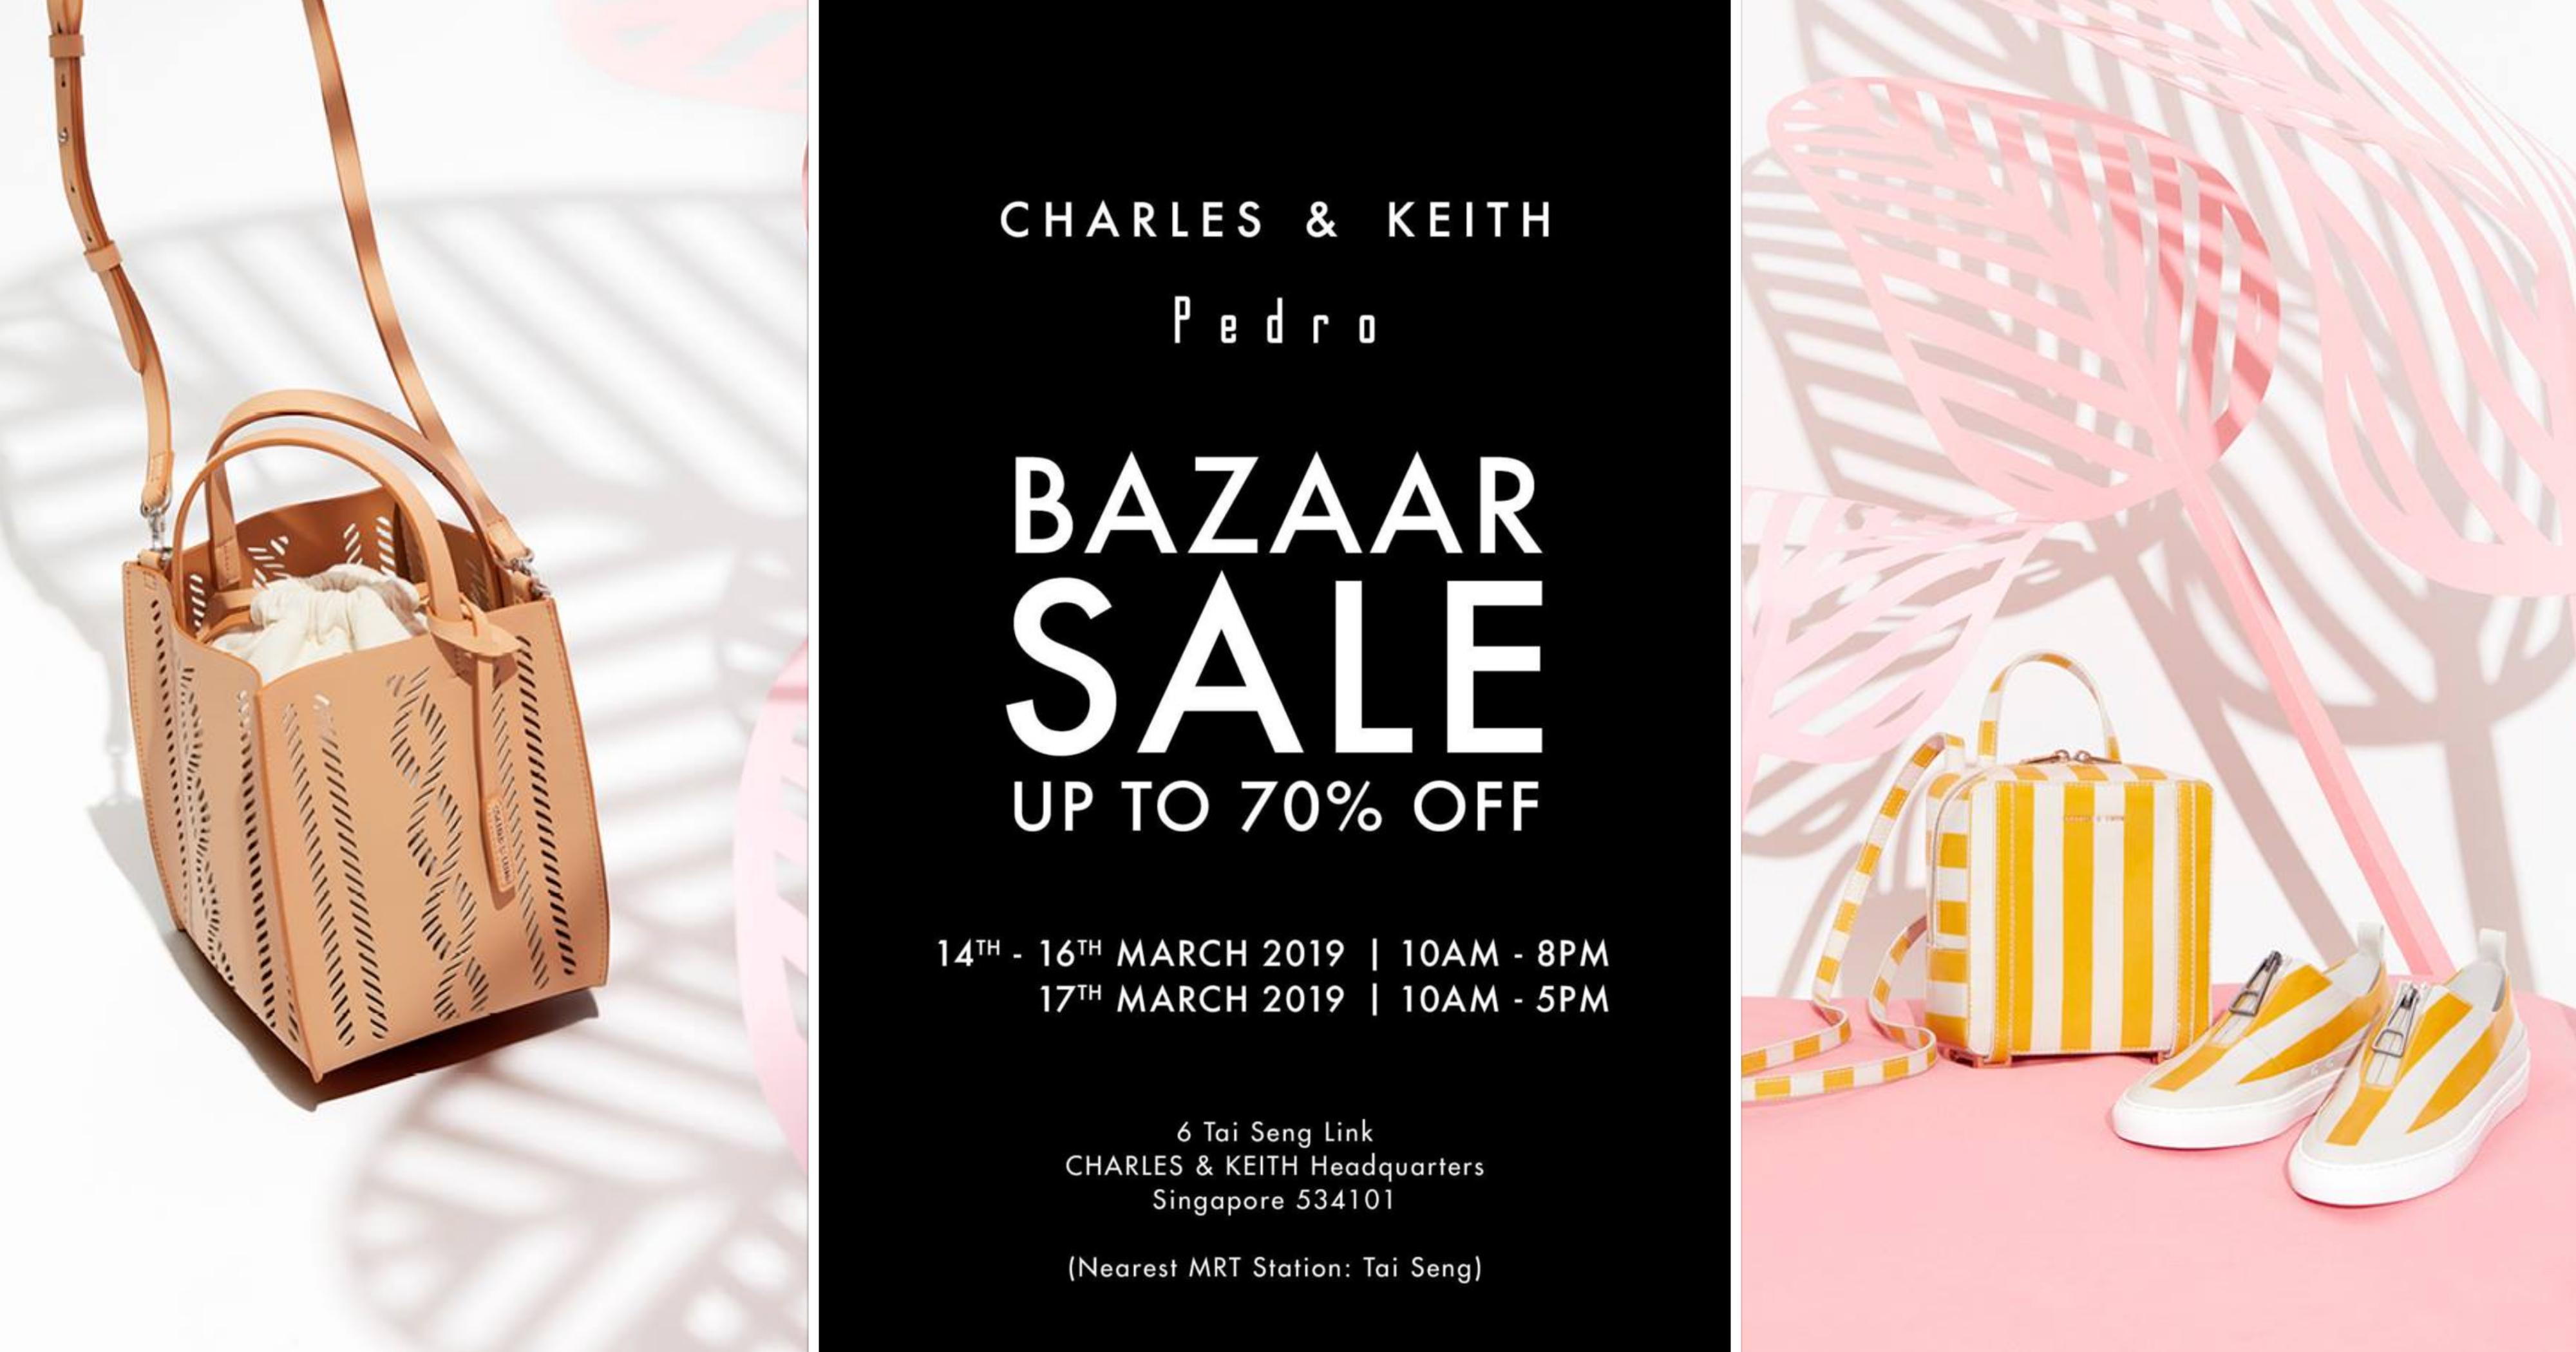 SINGAPORE-JUNE 17, 2018: Charles & Keith Store Outlet In Marina